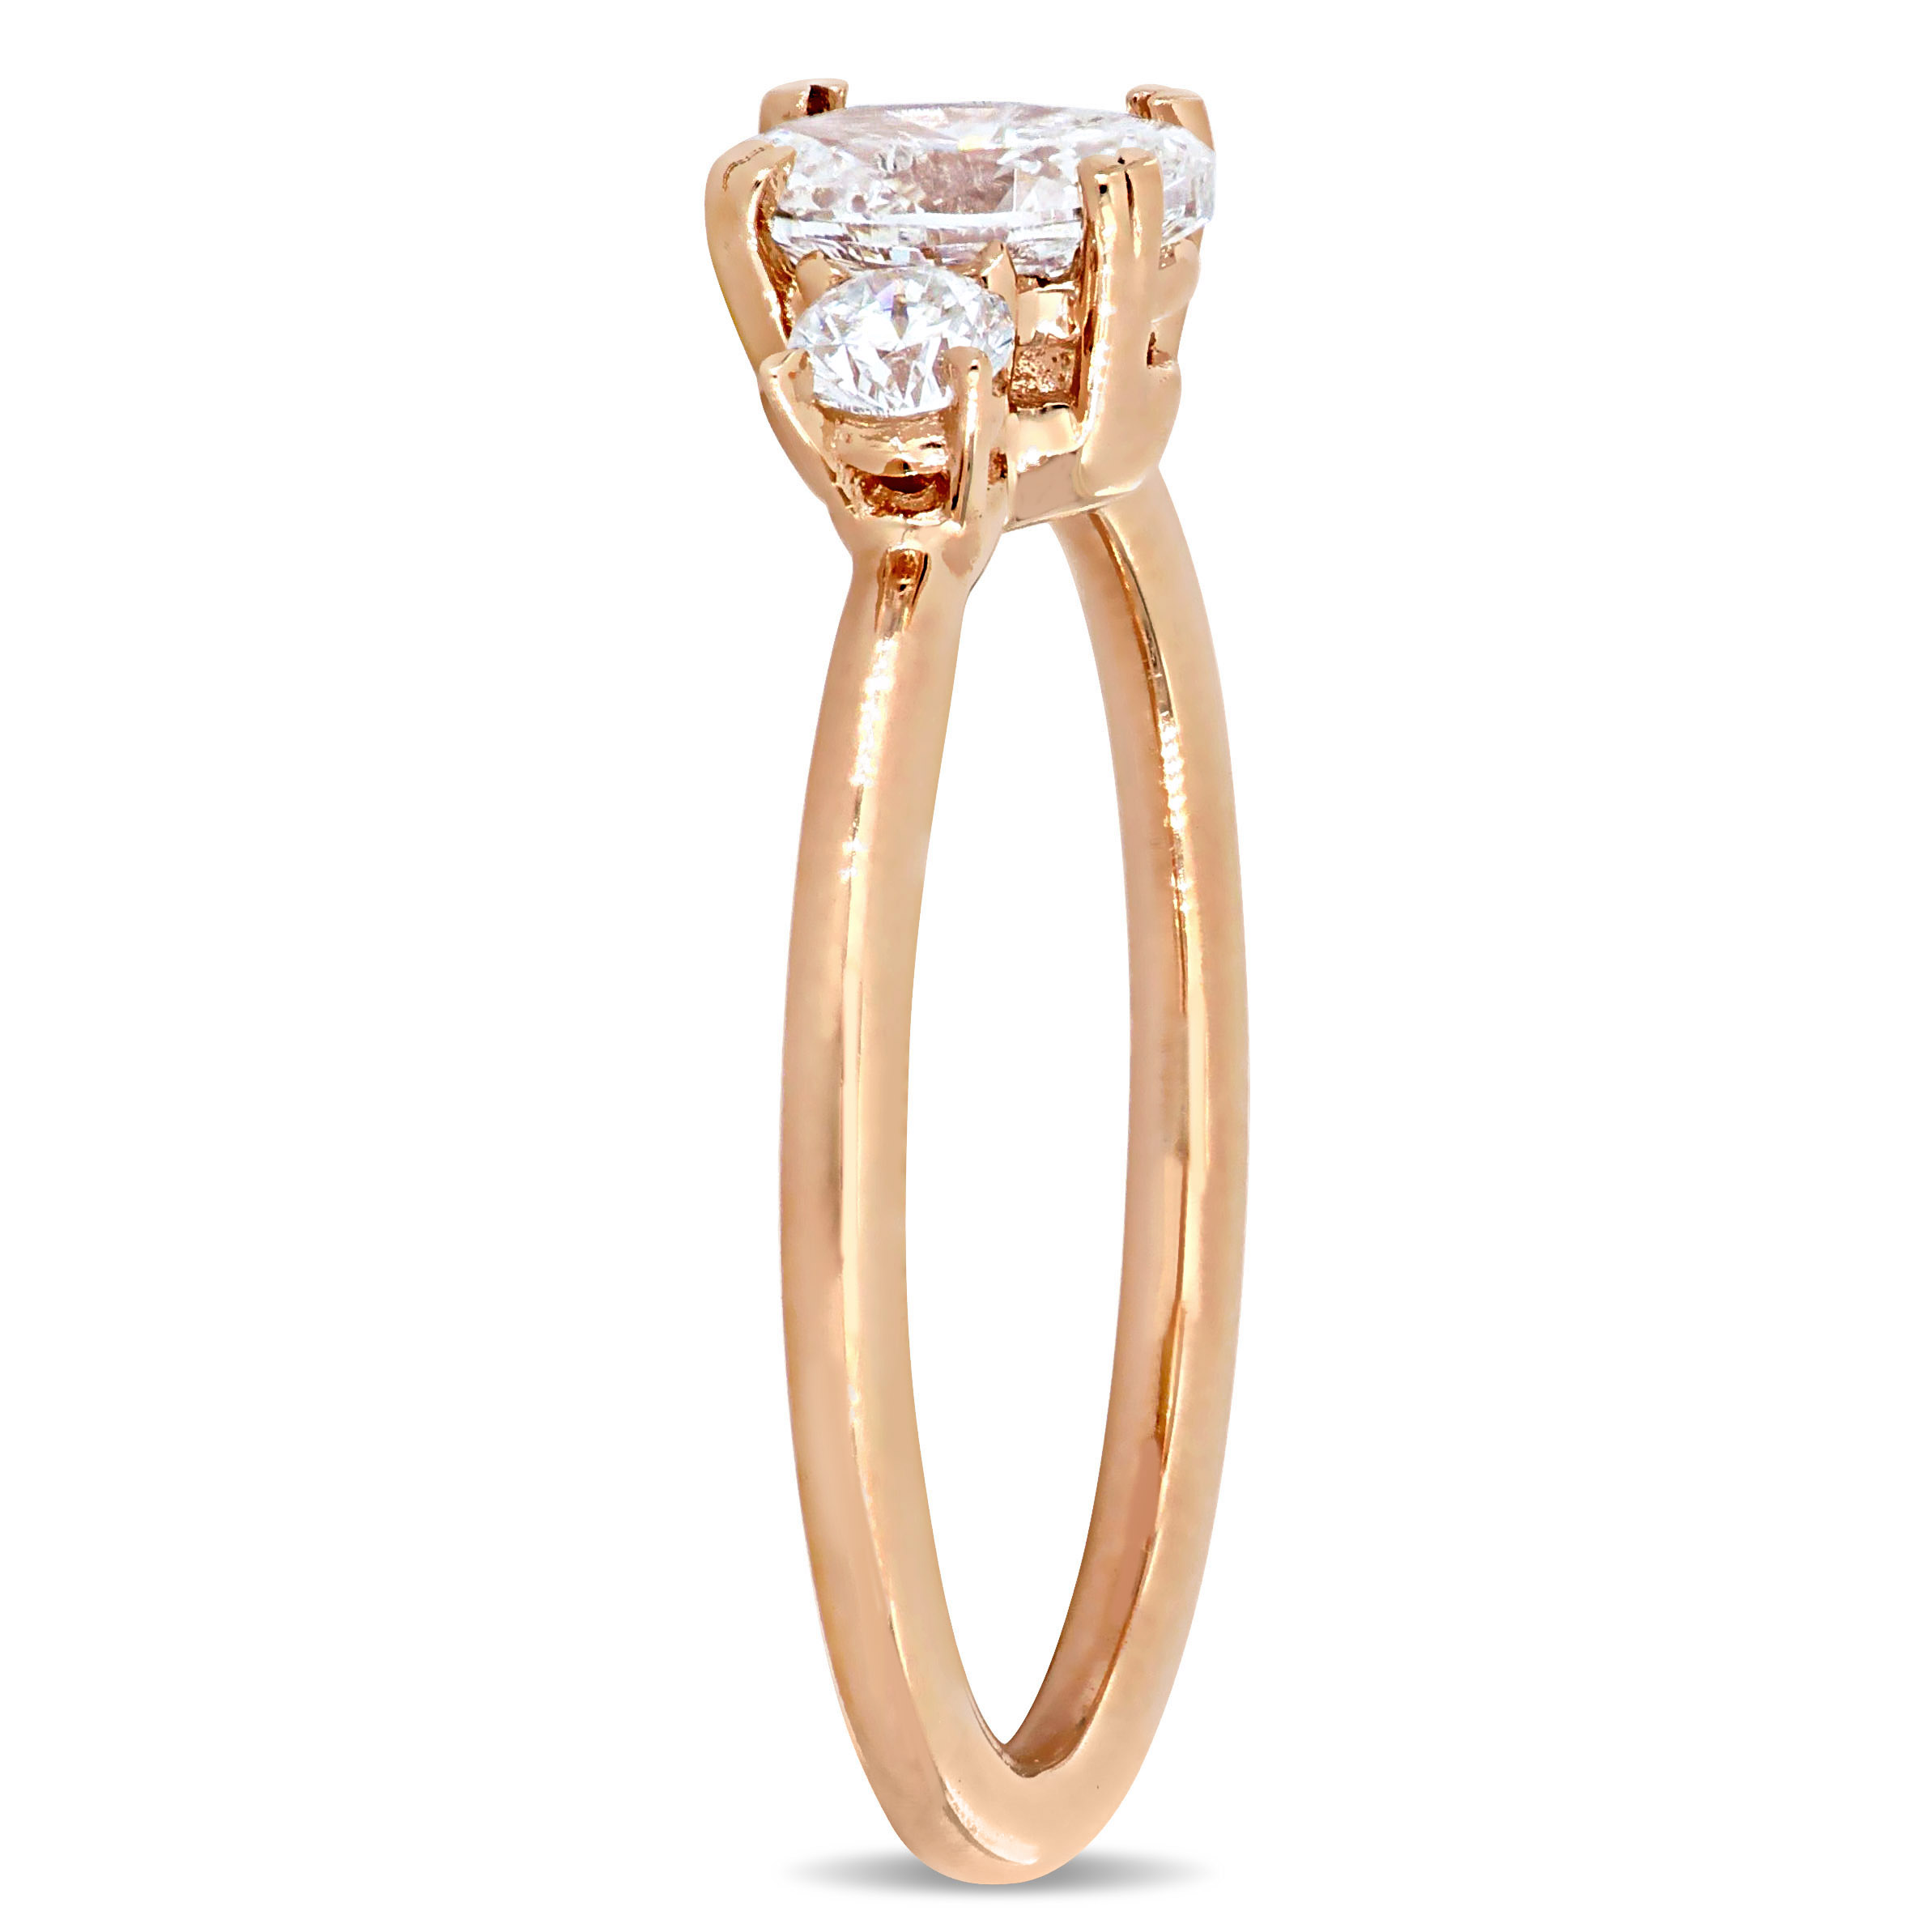 1 CT TW Oval and Round-Cut Diamond 3-Stone Engagement Ring in 14k Rose Gold